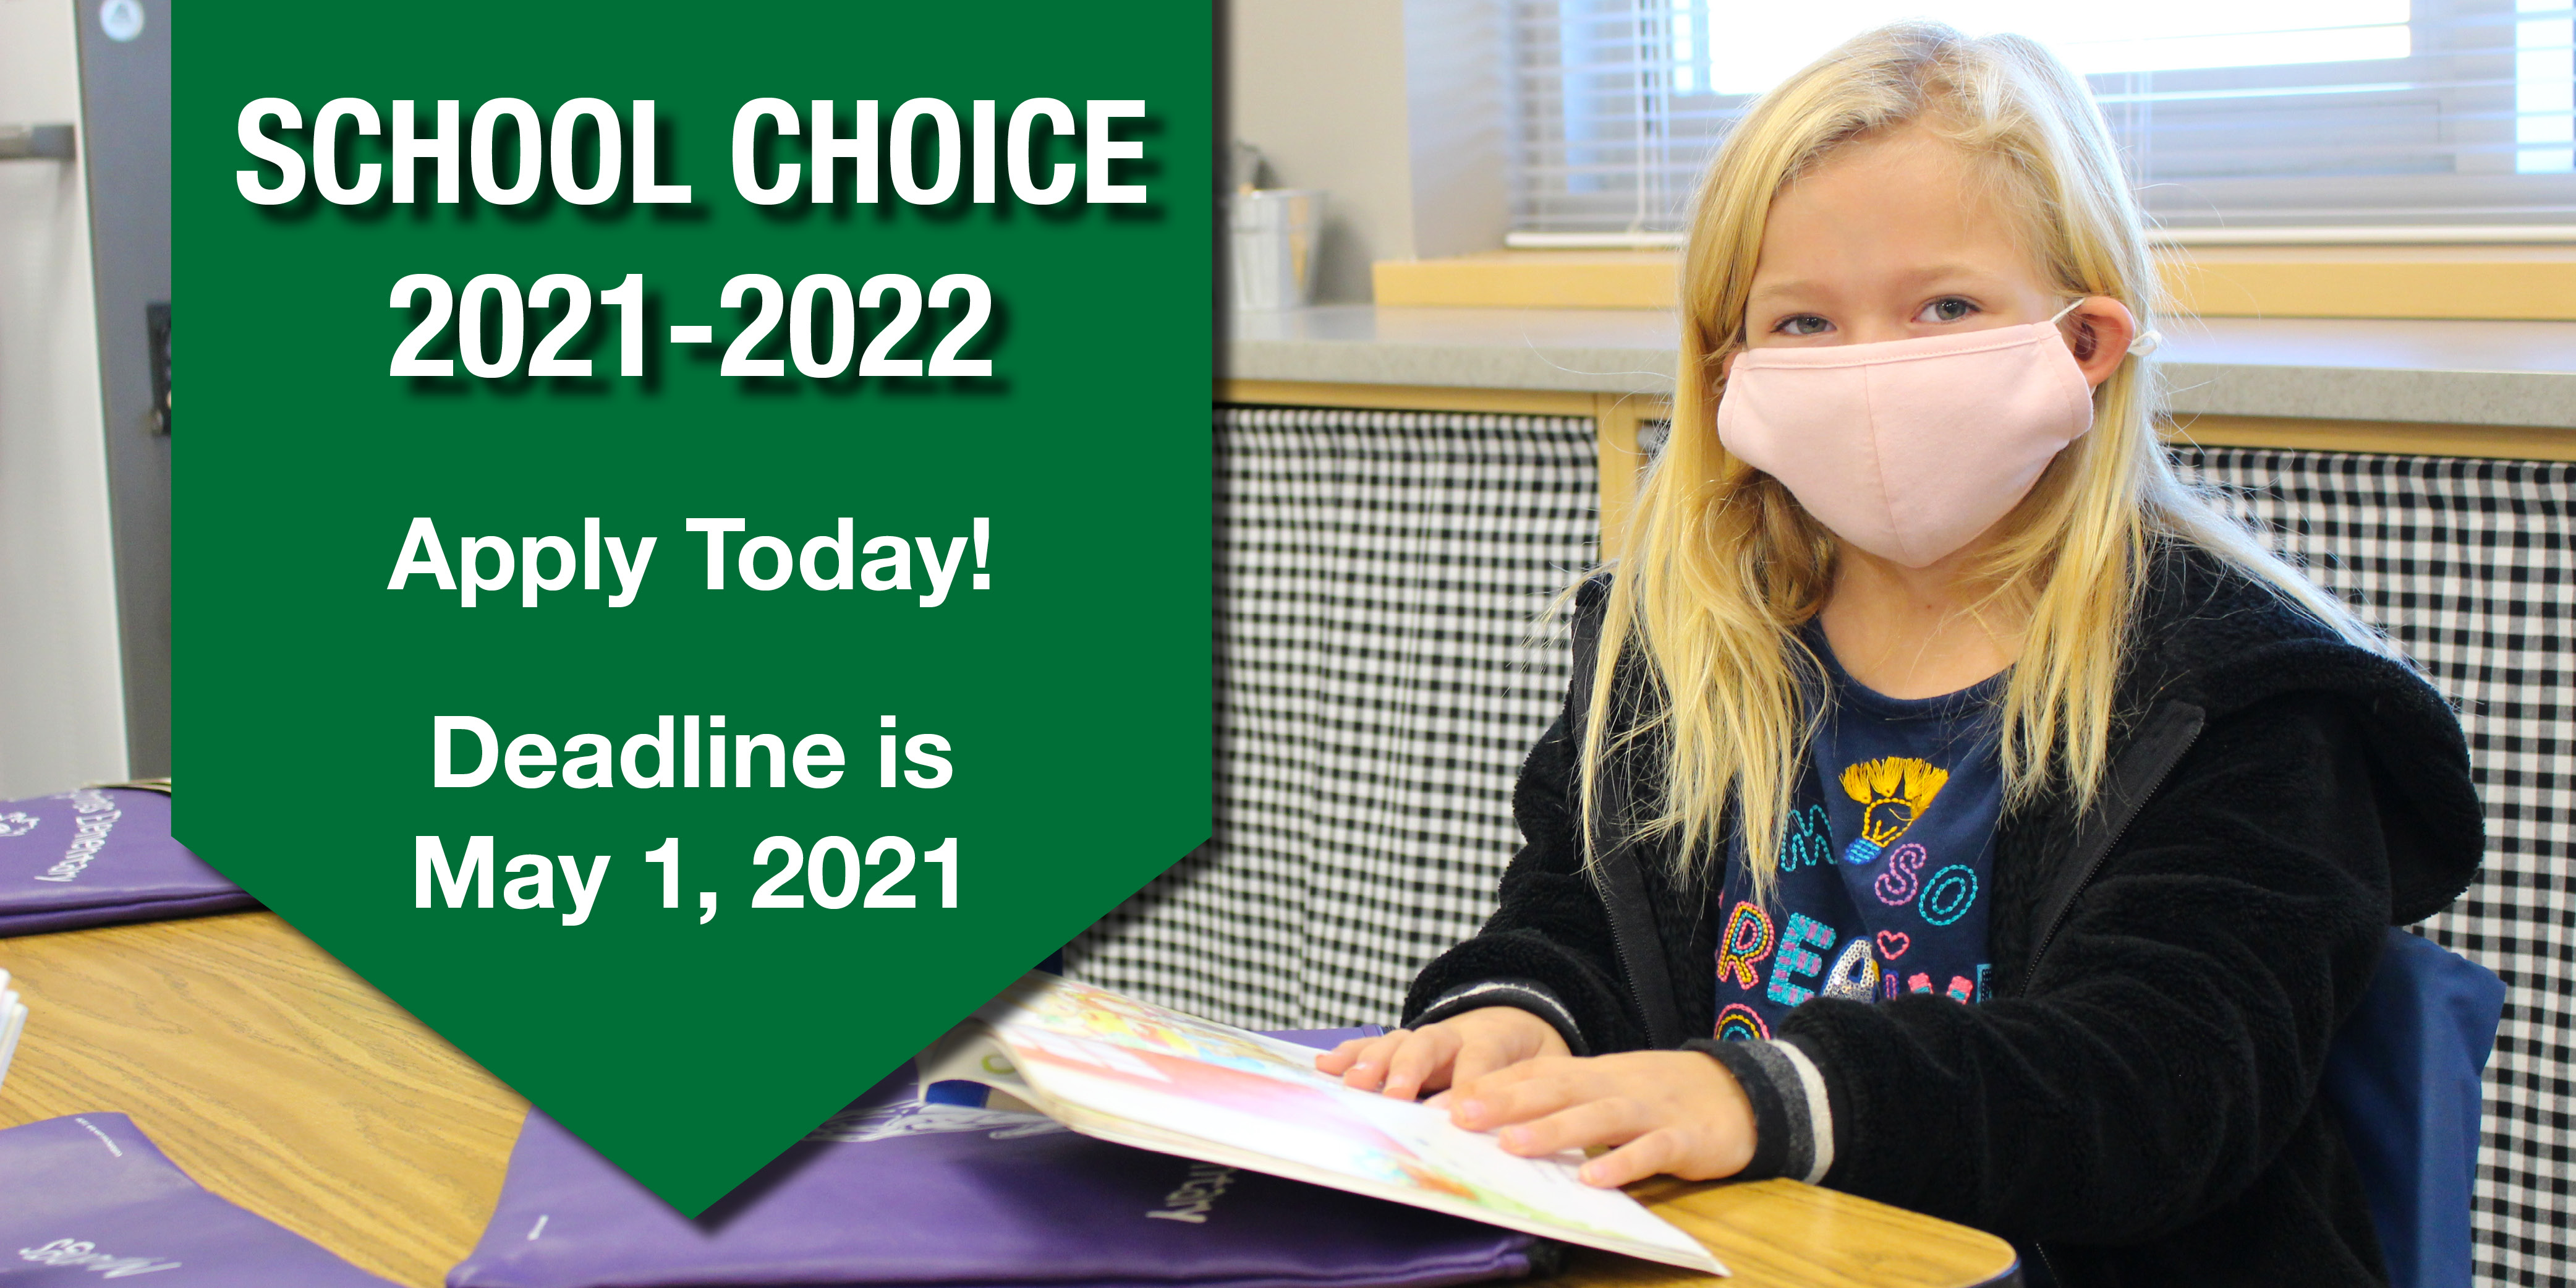 VBSD to participate in School Choice for 2021-2022